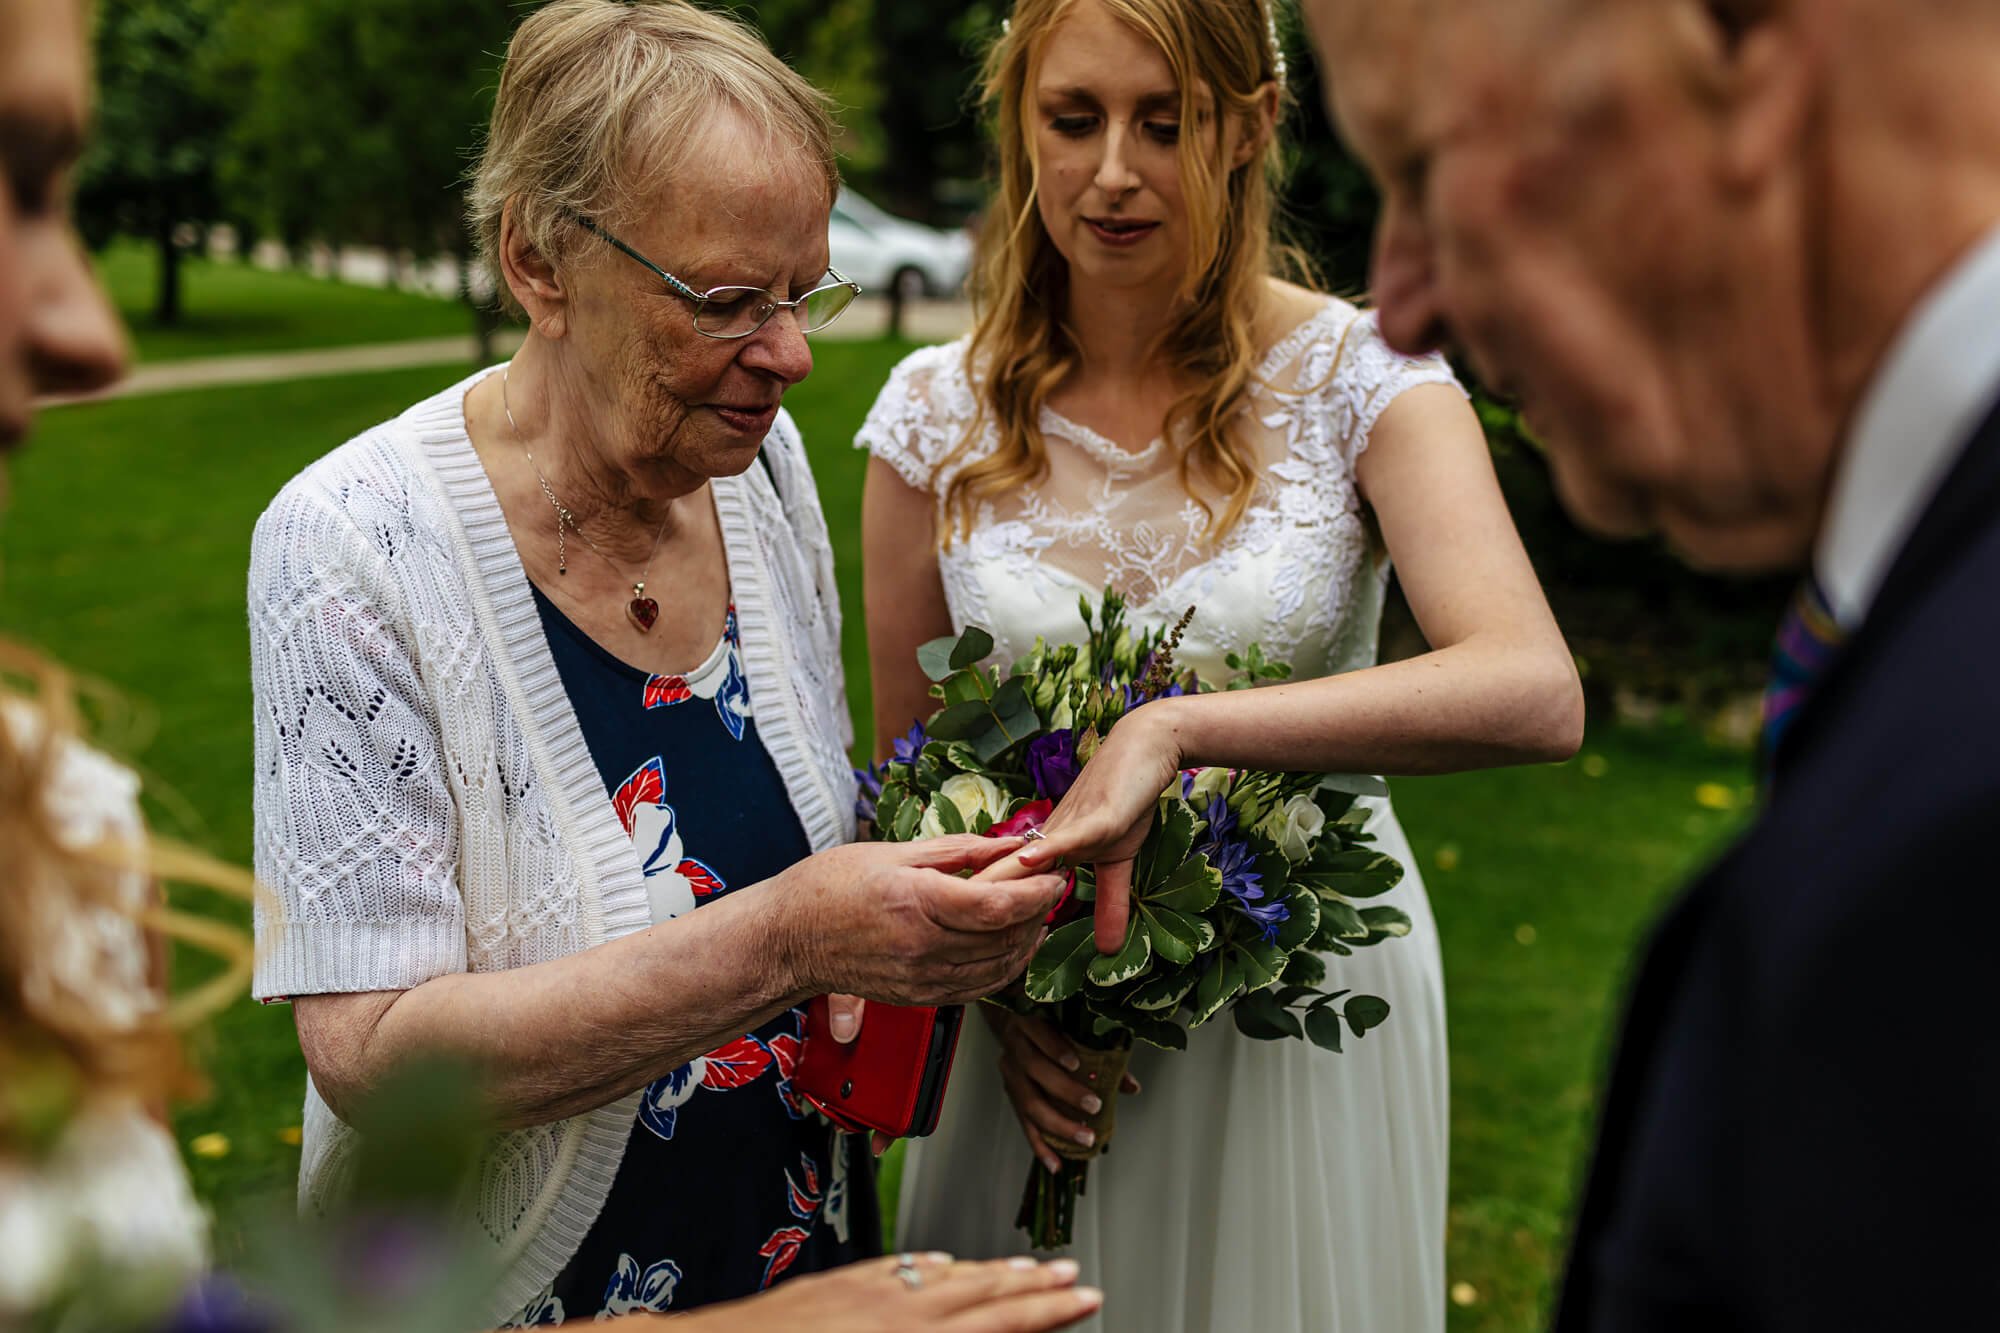 Bride showing off her new wedding ring to family